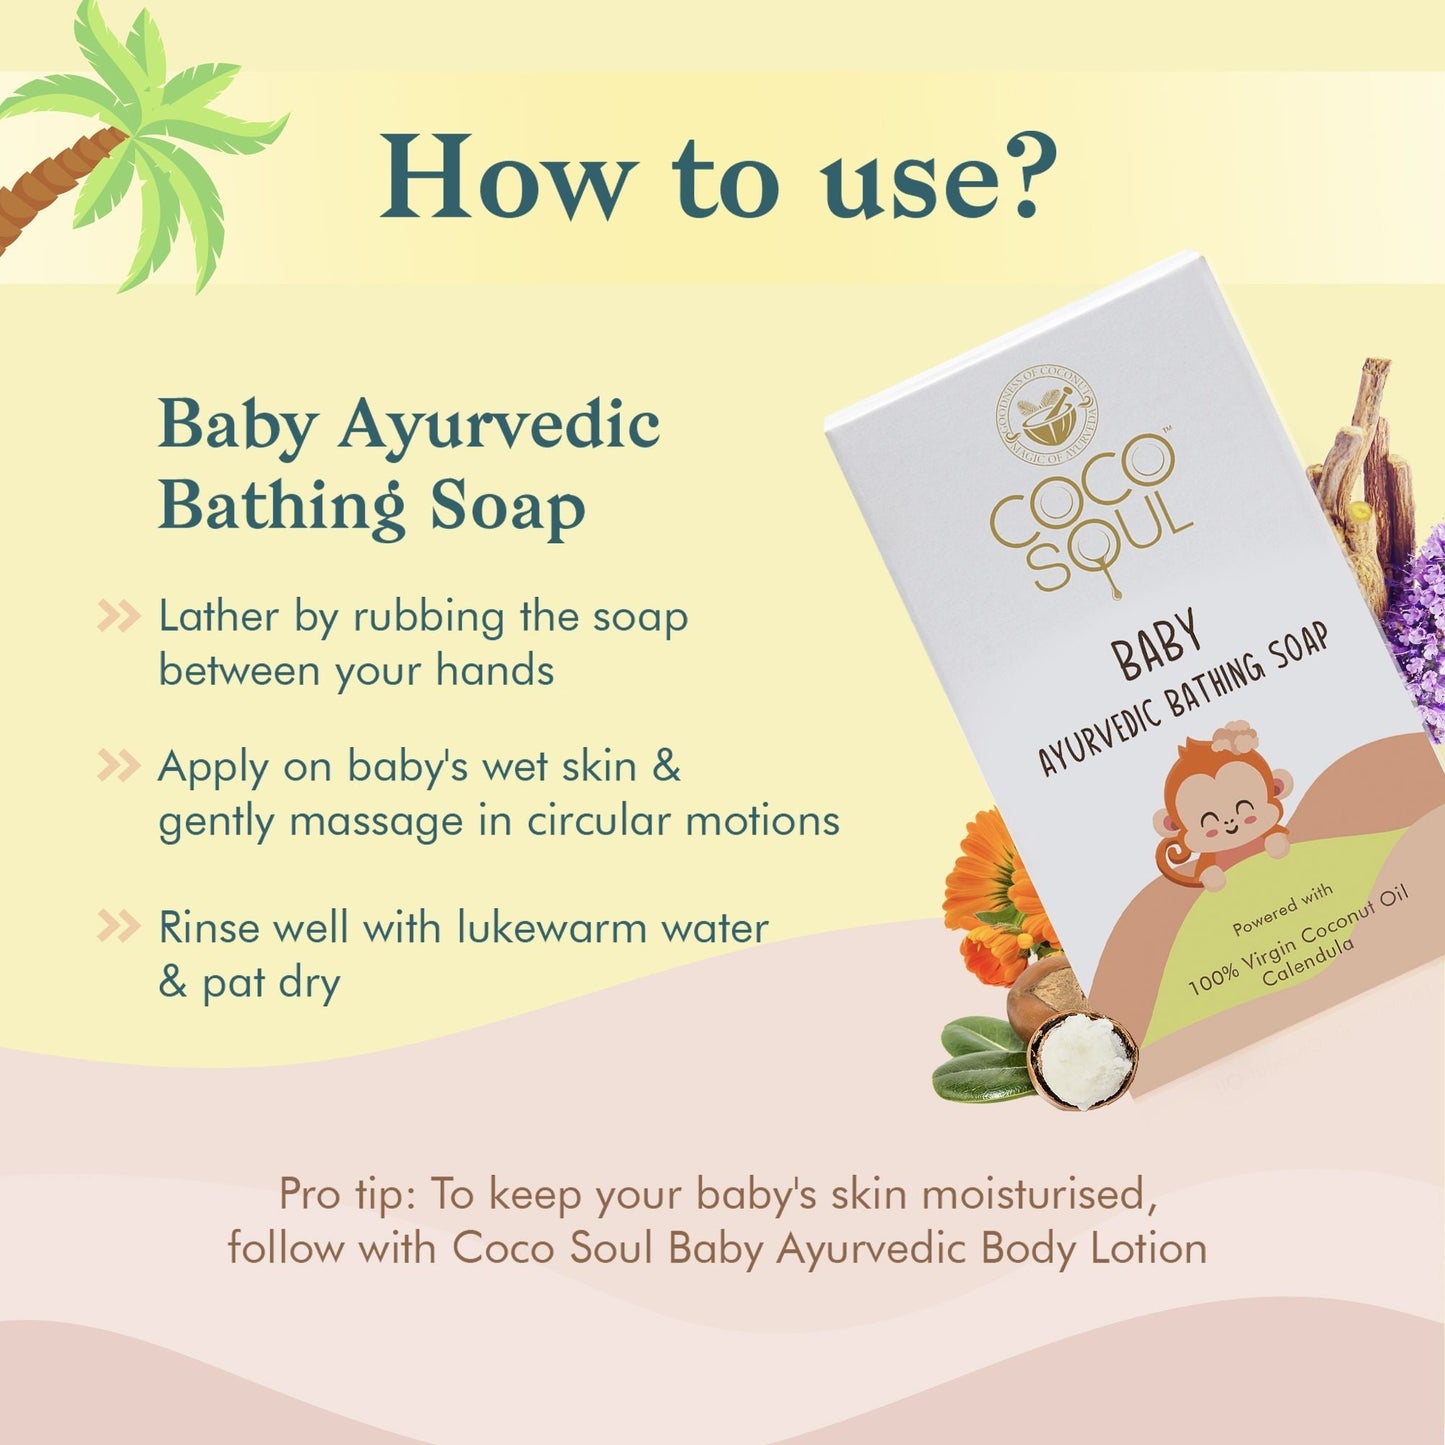 Baby Ayurvedic Bathing Soap 75 gm  From the makers of Parachute Advansed  150gm Pack of 2